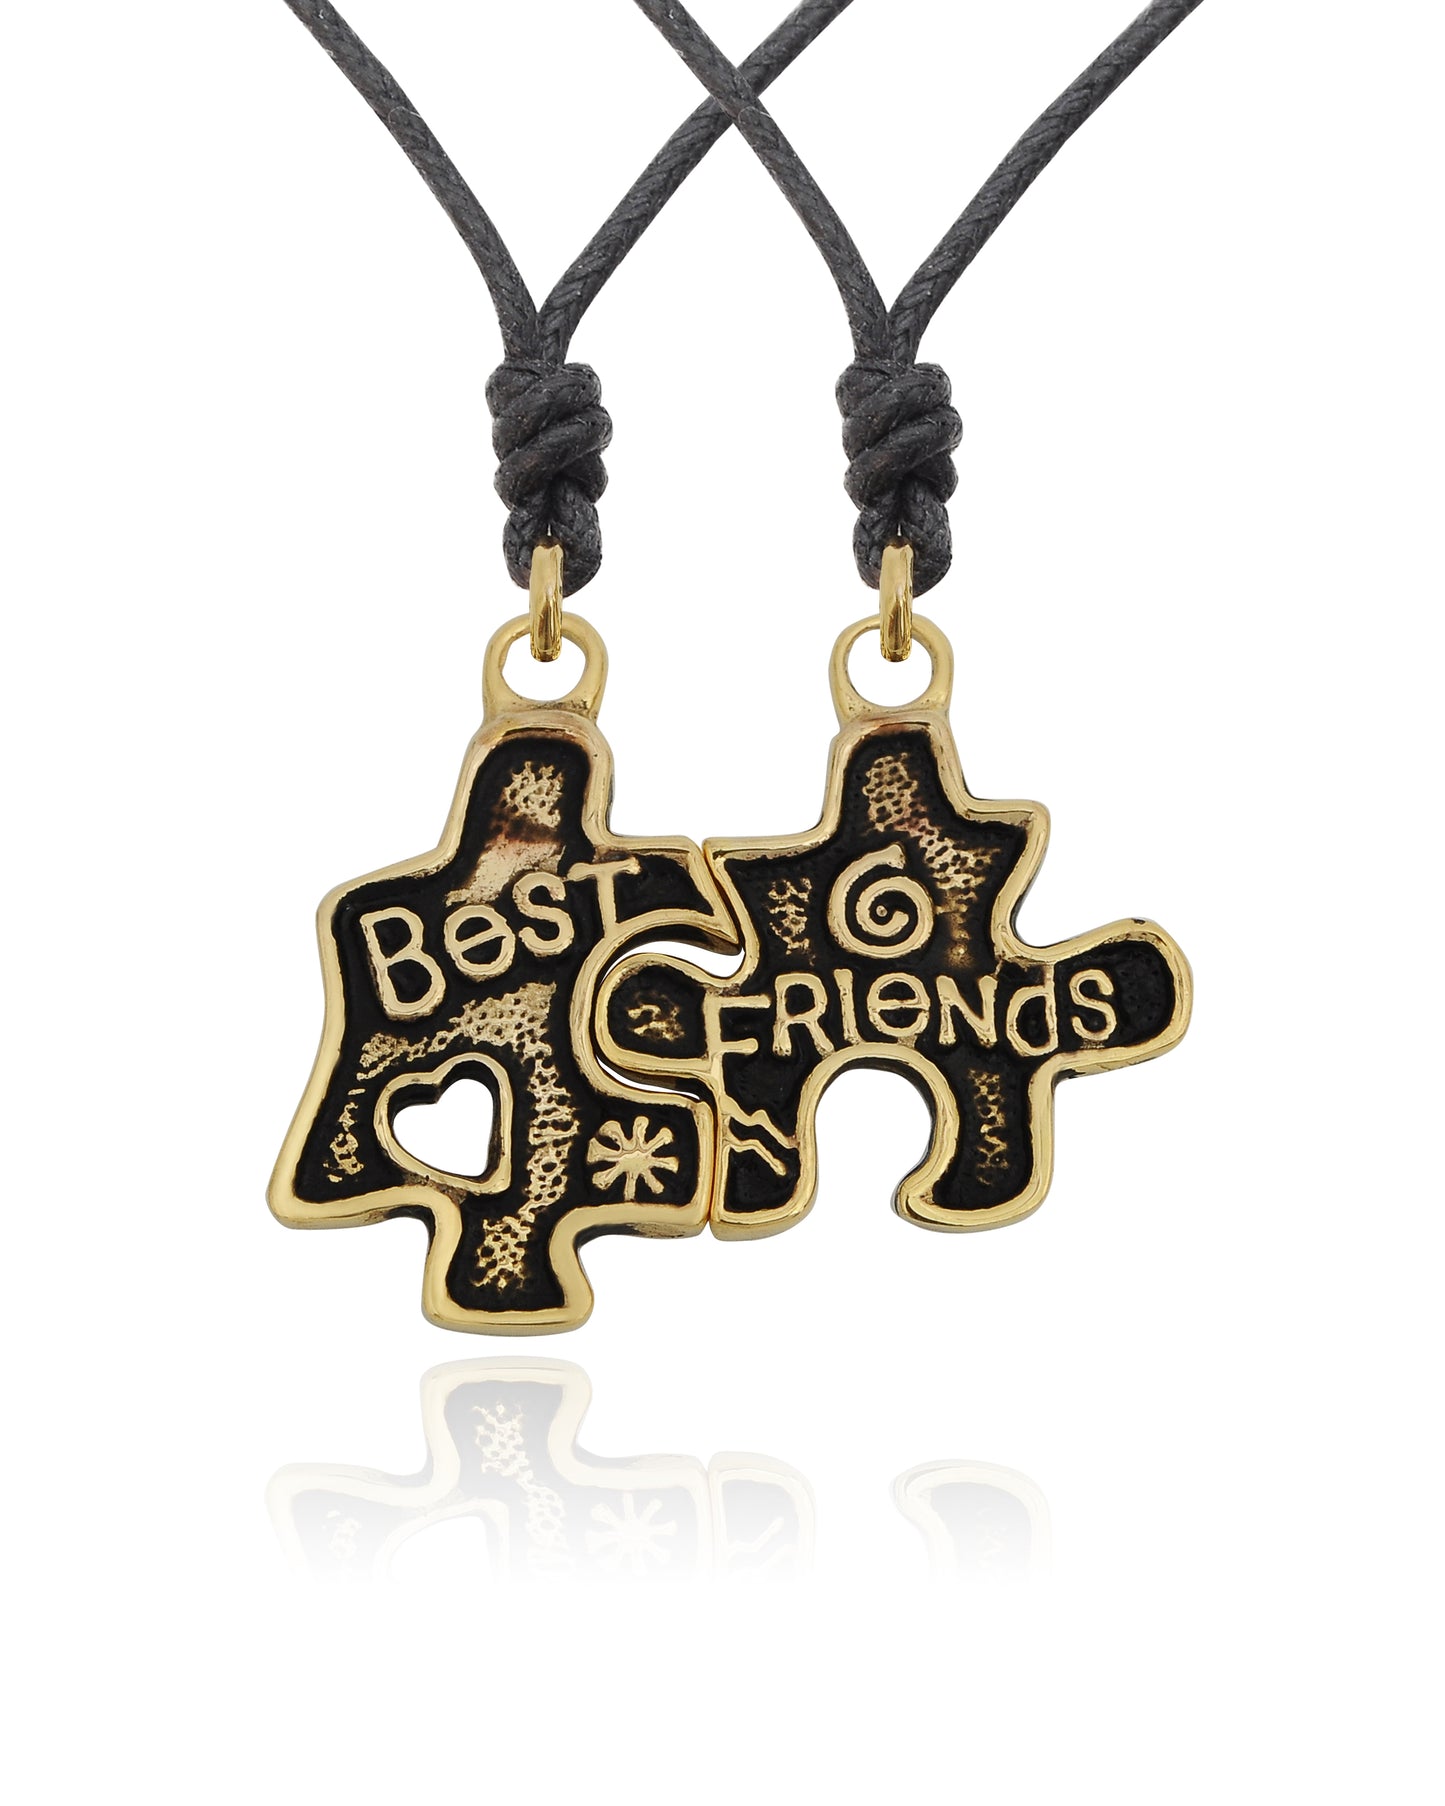 Best Friend Puzzle Silver Pewter Gold Brass Charm Necklace Pendant